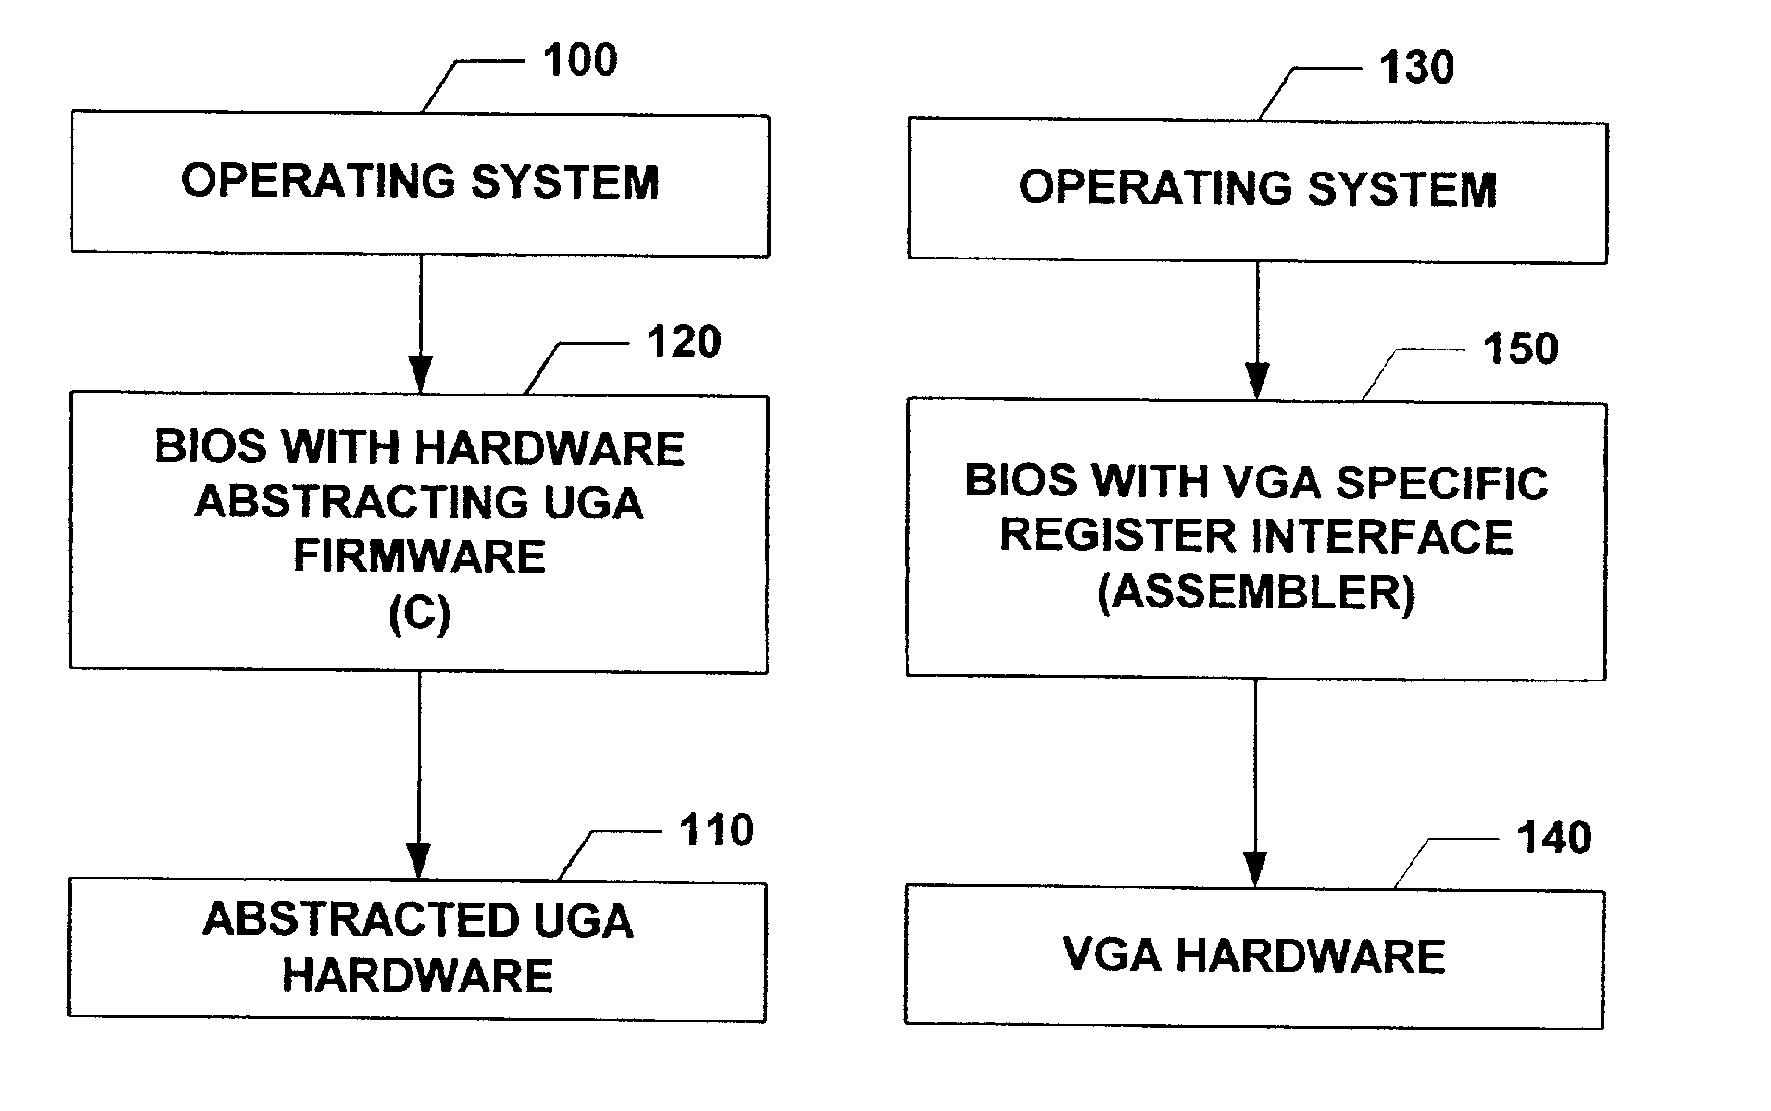 Universal graphic adapter for interfacing with hardware and means for encapsulating and abstracting details of the hardware